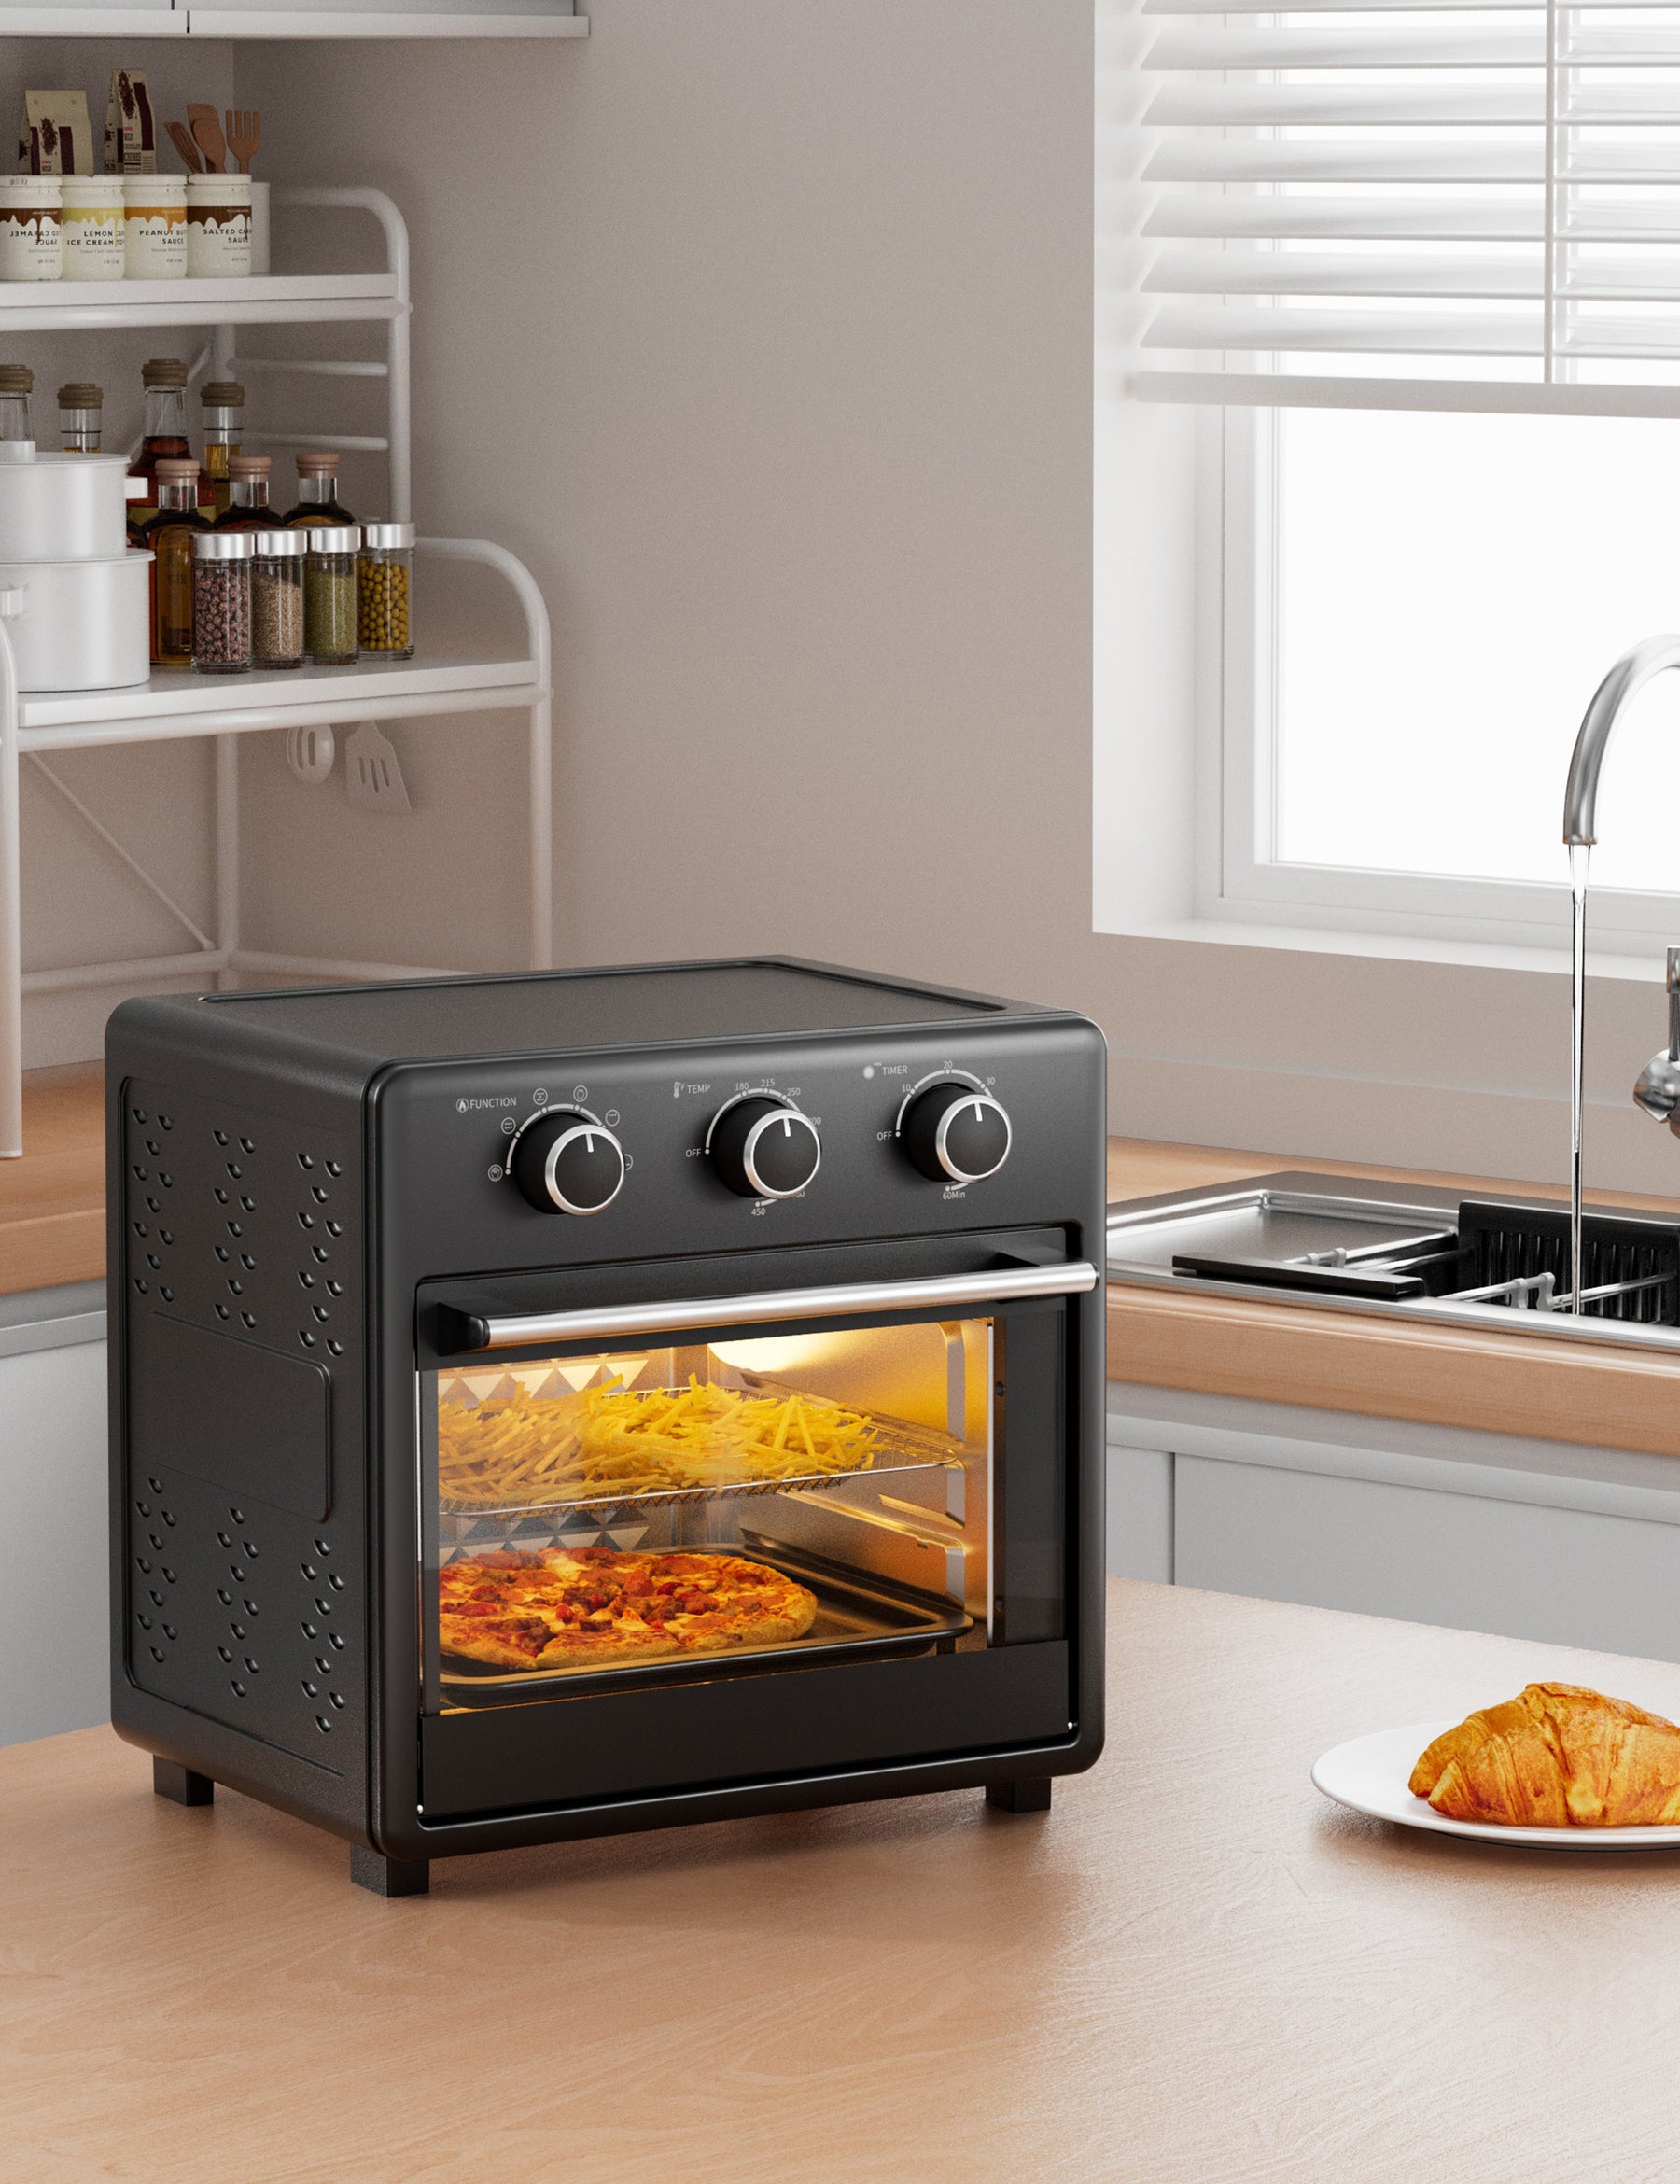 TaoTronics Air Fryer Toaster Oven - 17QT Convection Oven, 11-in-1 Steam Oven, Oven Oil-less Cooker with Rotisserie Shaft